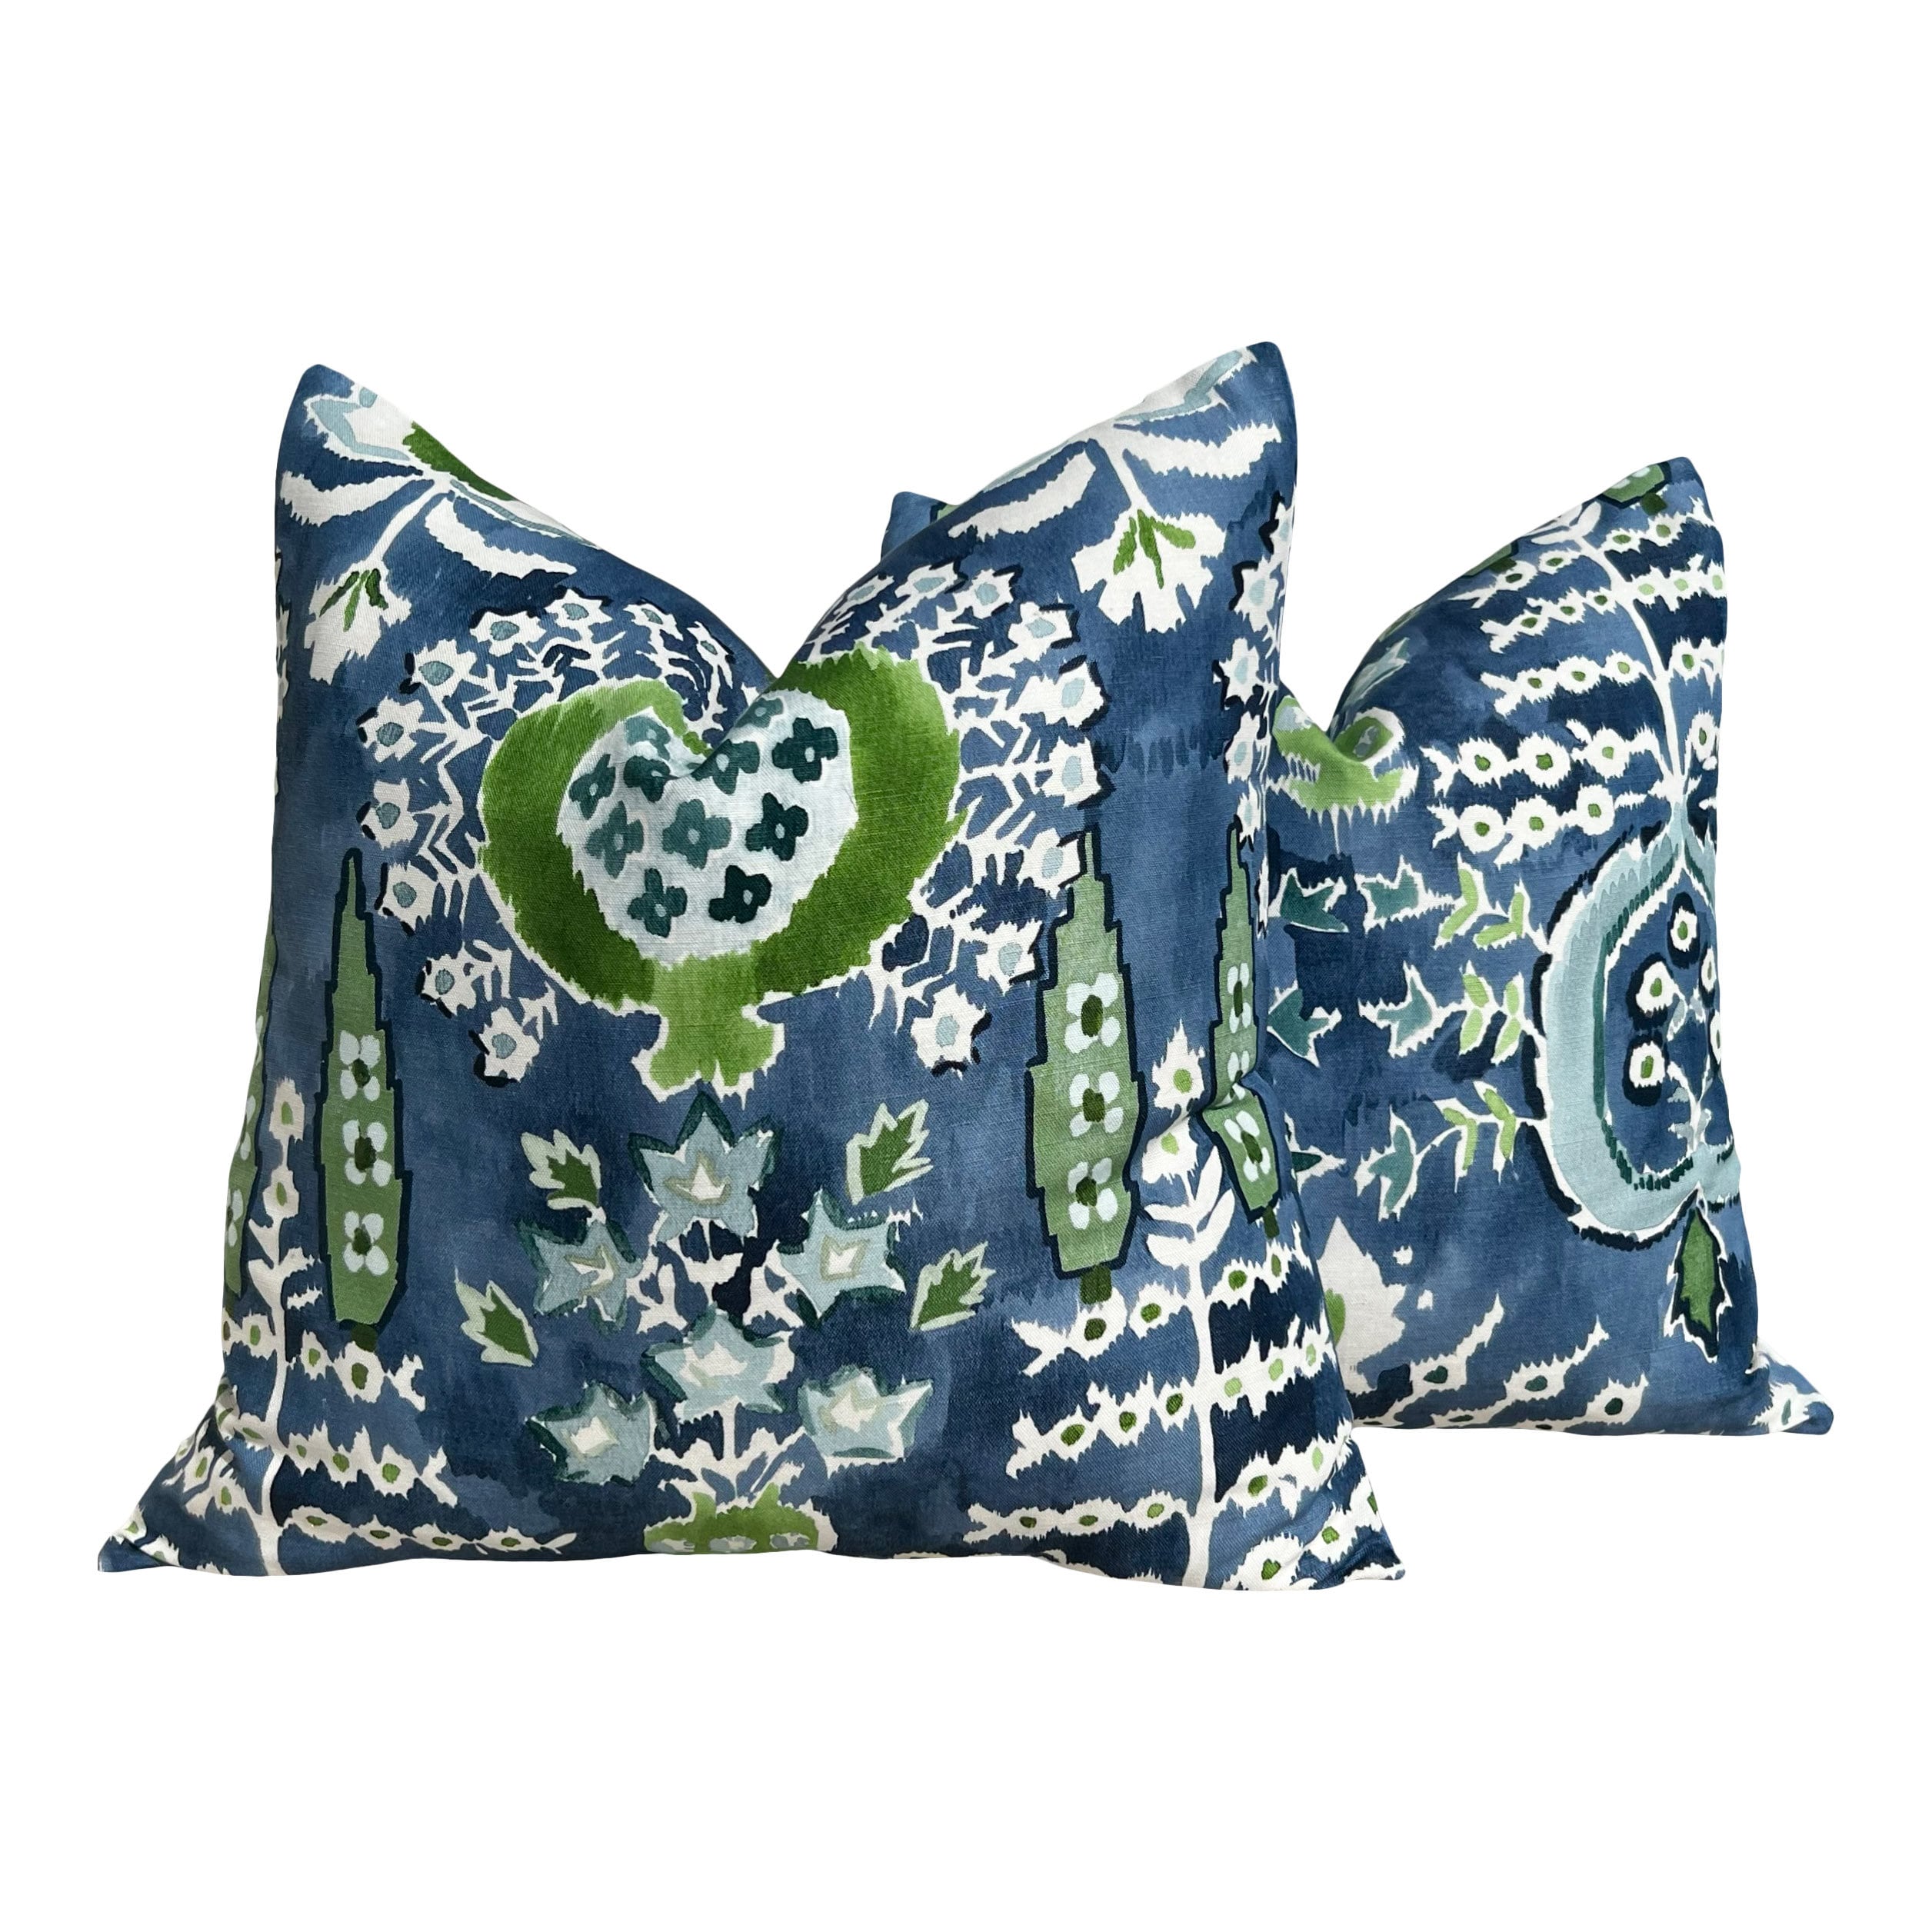 Thibaut Mendoza Suzani in Blue and Green. High End Pillow Covers, Designer Navy Pillows, Medalion Euro Sham Covers, Lumbar Pillows Blue